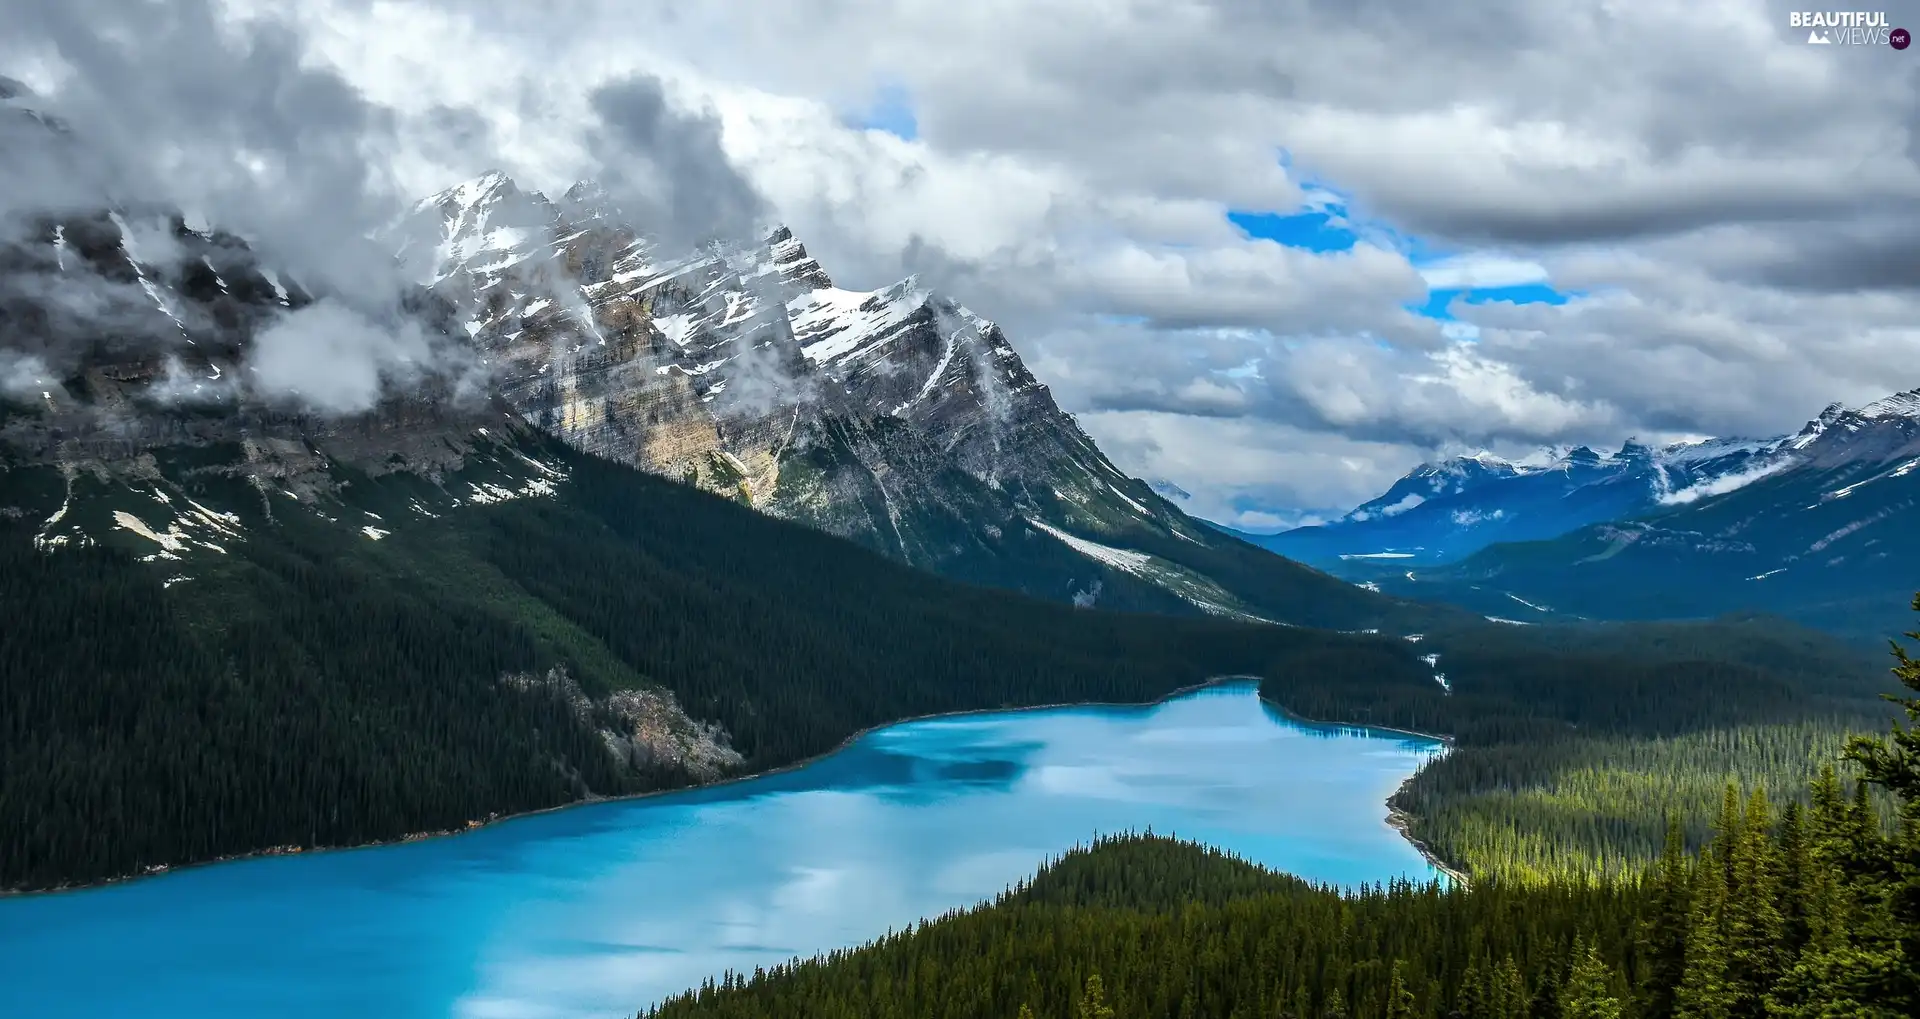 Mountains Canadian Rockies, Peyto Lake, clouds, forest, viewes, Banff National Park, Canada, trees